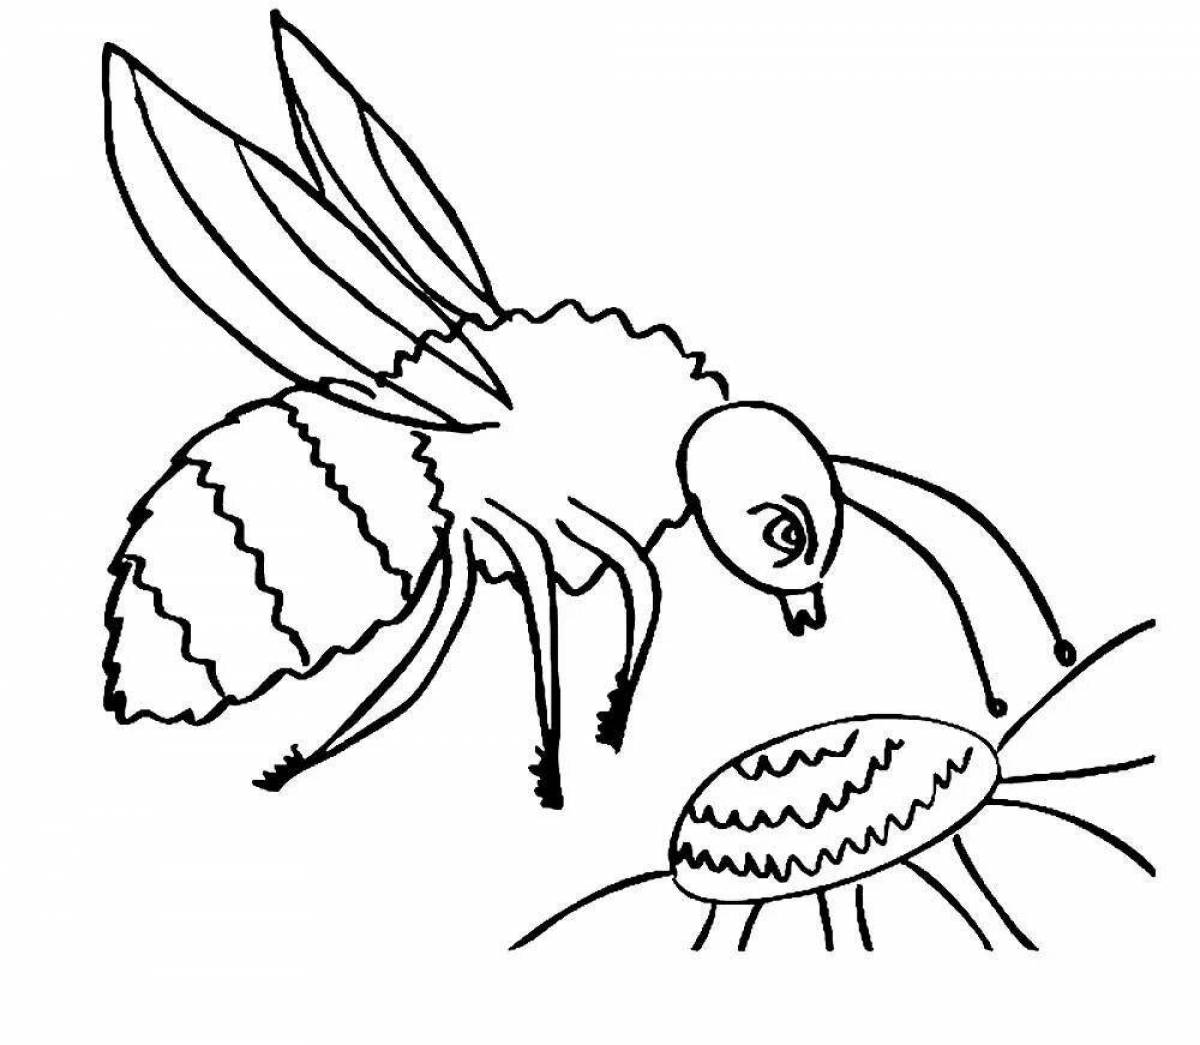 Glamorous shemale coloring page for kids